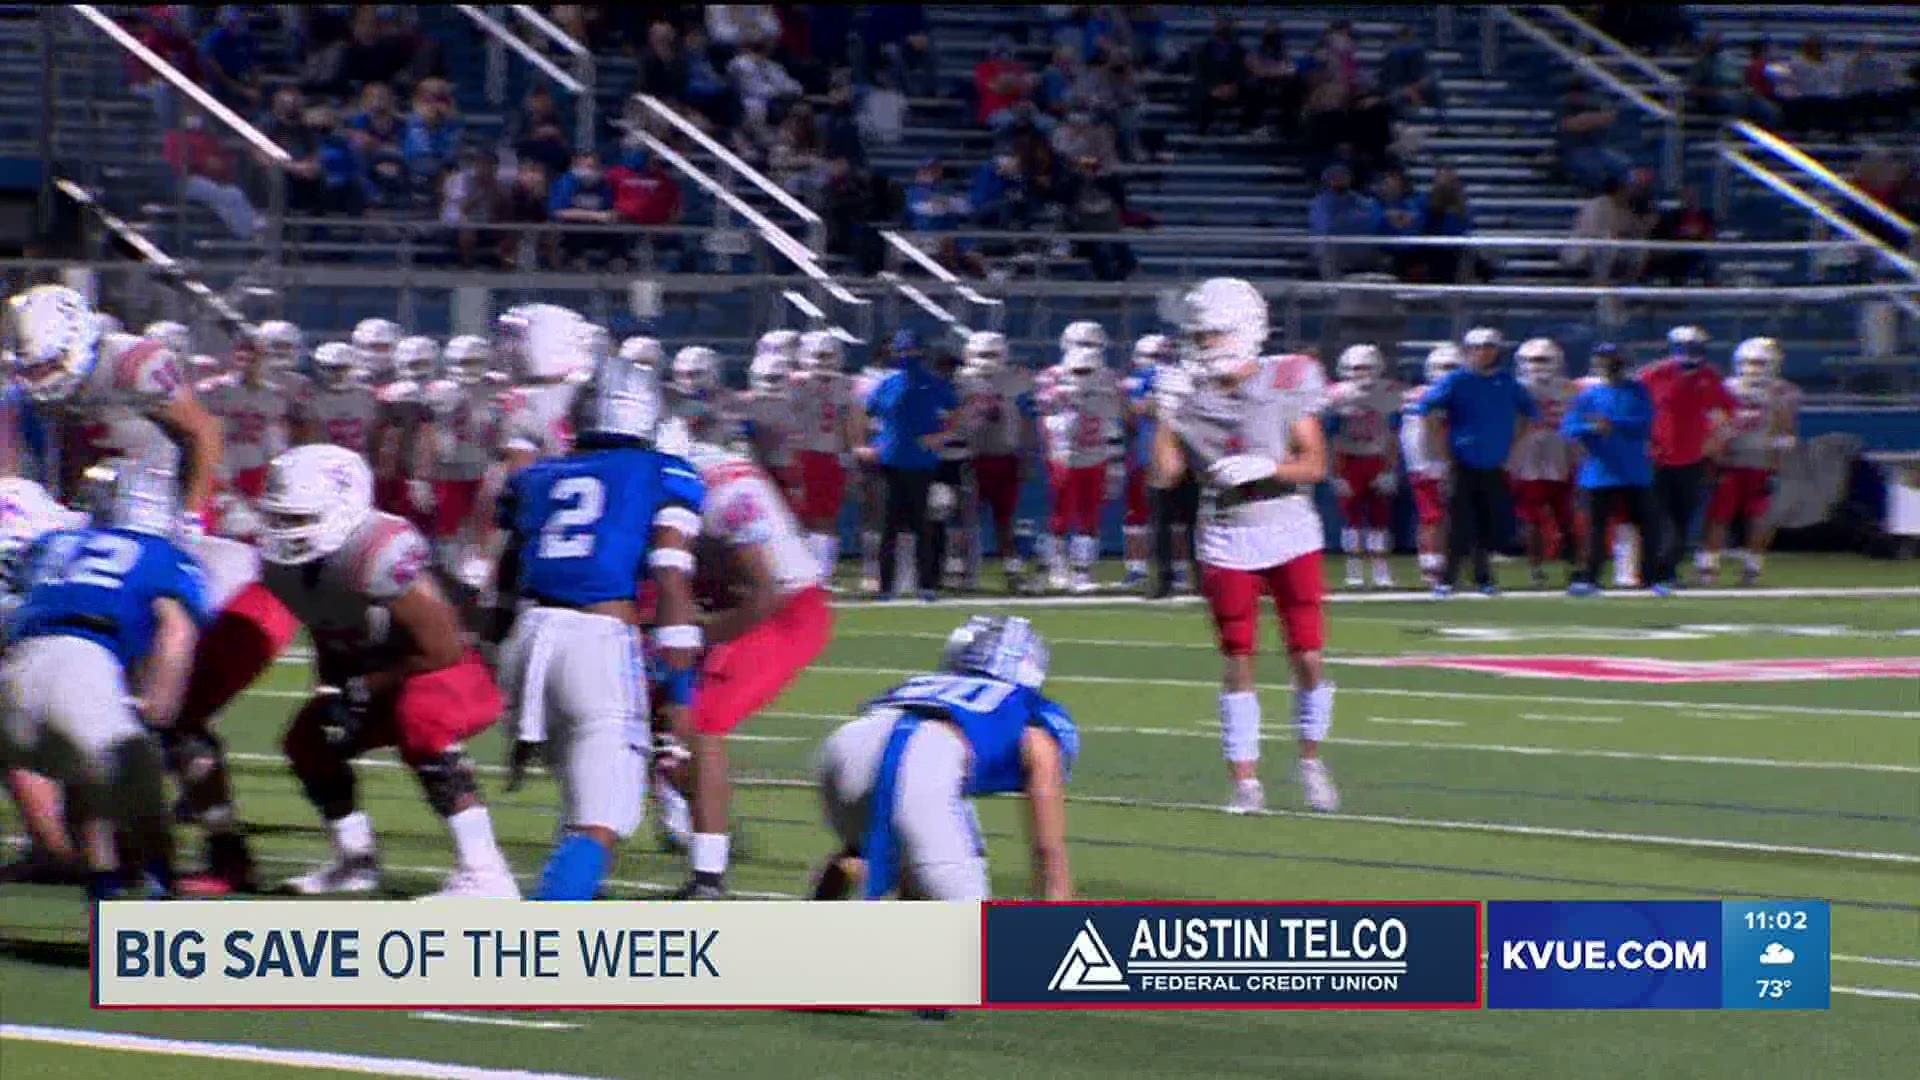 Vote on the KVUE Big Save of the Week here!